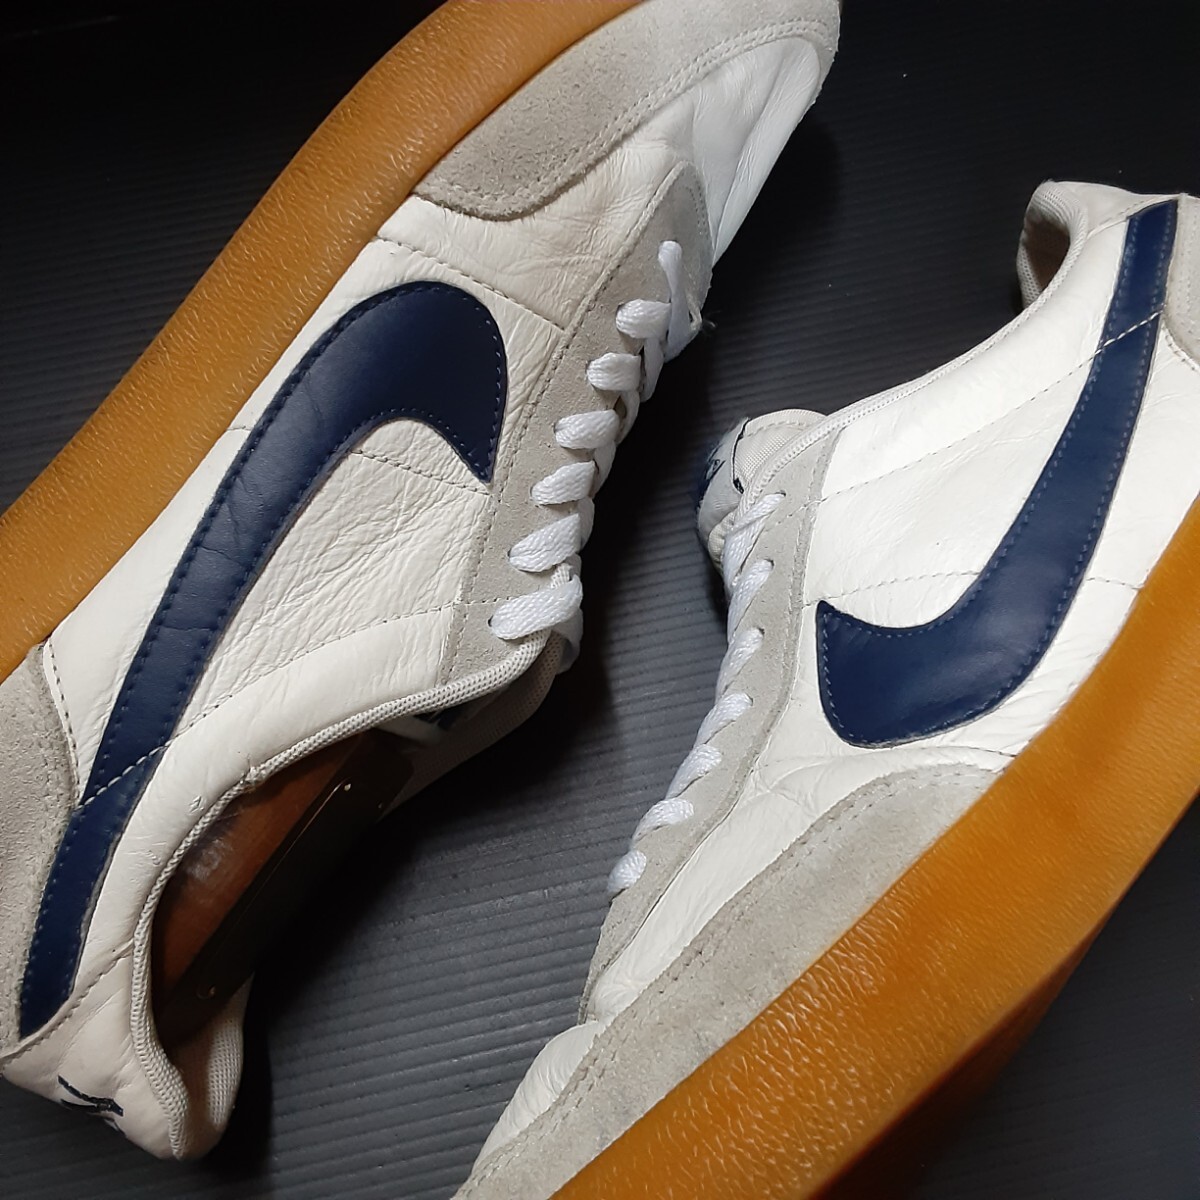  most price!.16200 jpy!80\'s reissue! special order chewing gum sole × in step leather!J Crew × Nike cut Schott 2 high class sneakers! college color! white navy blue rare 29